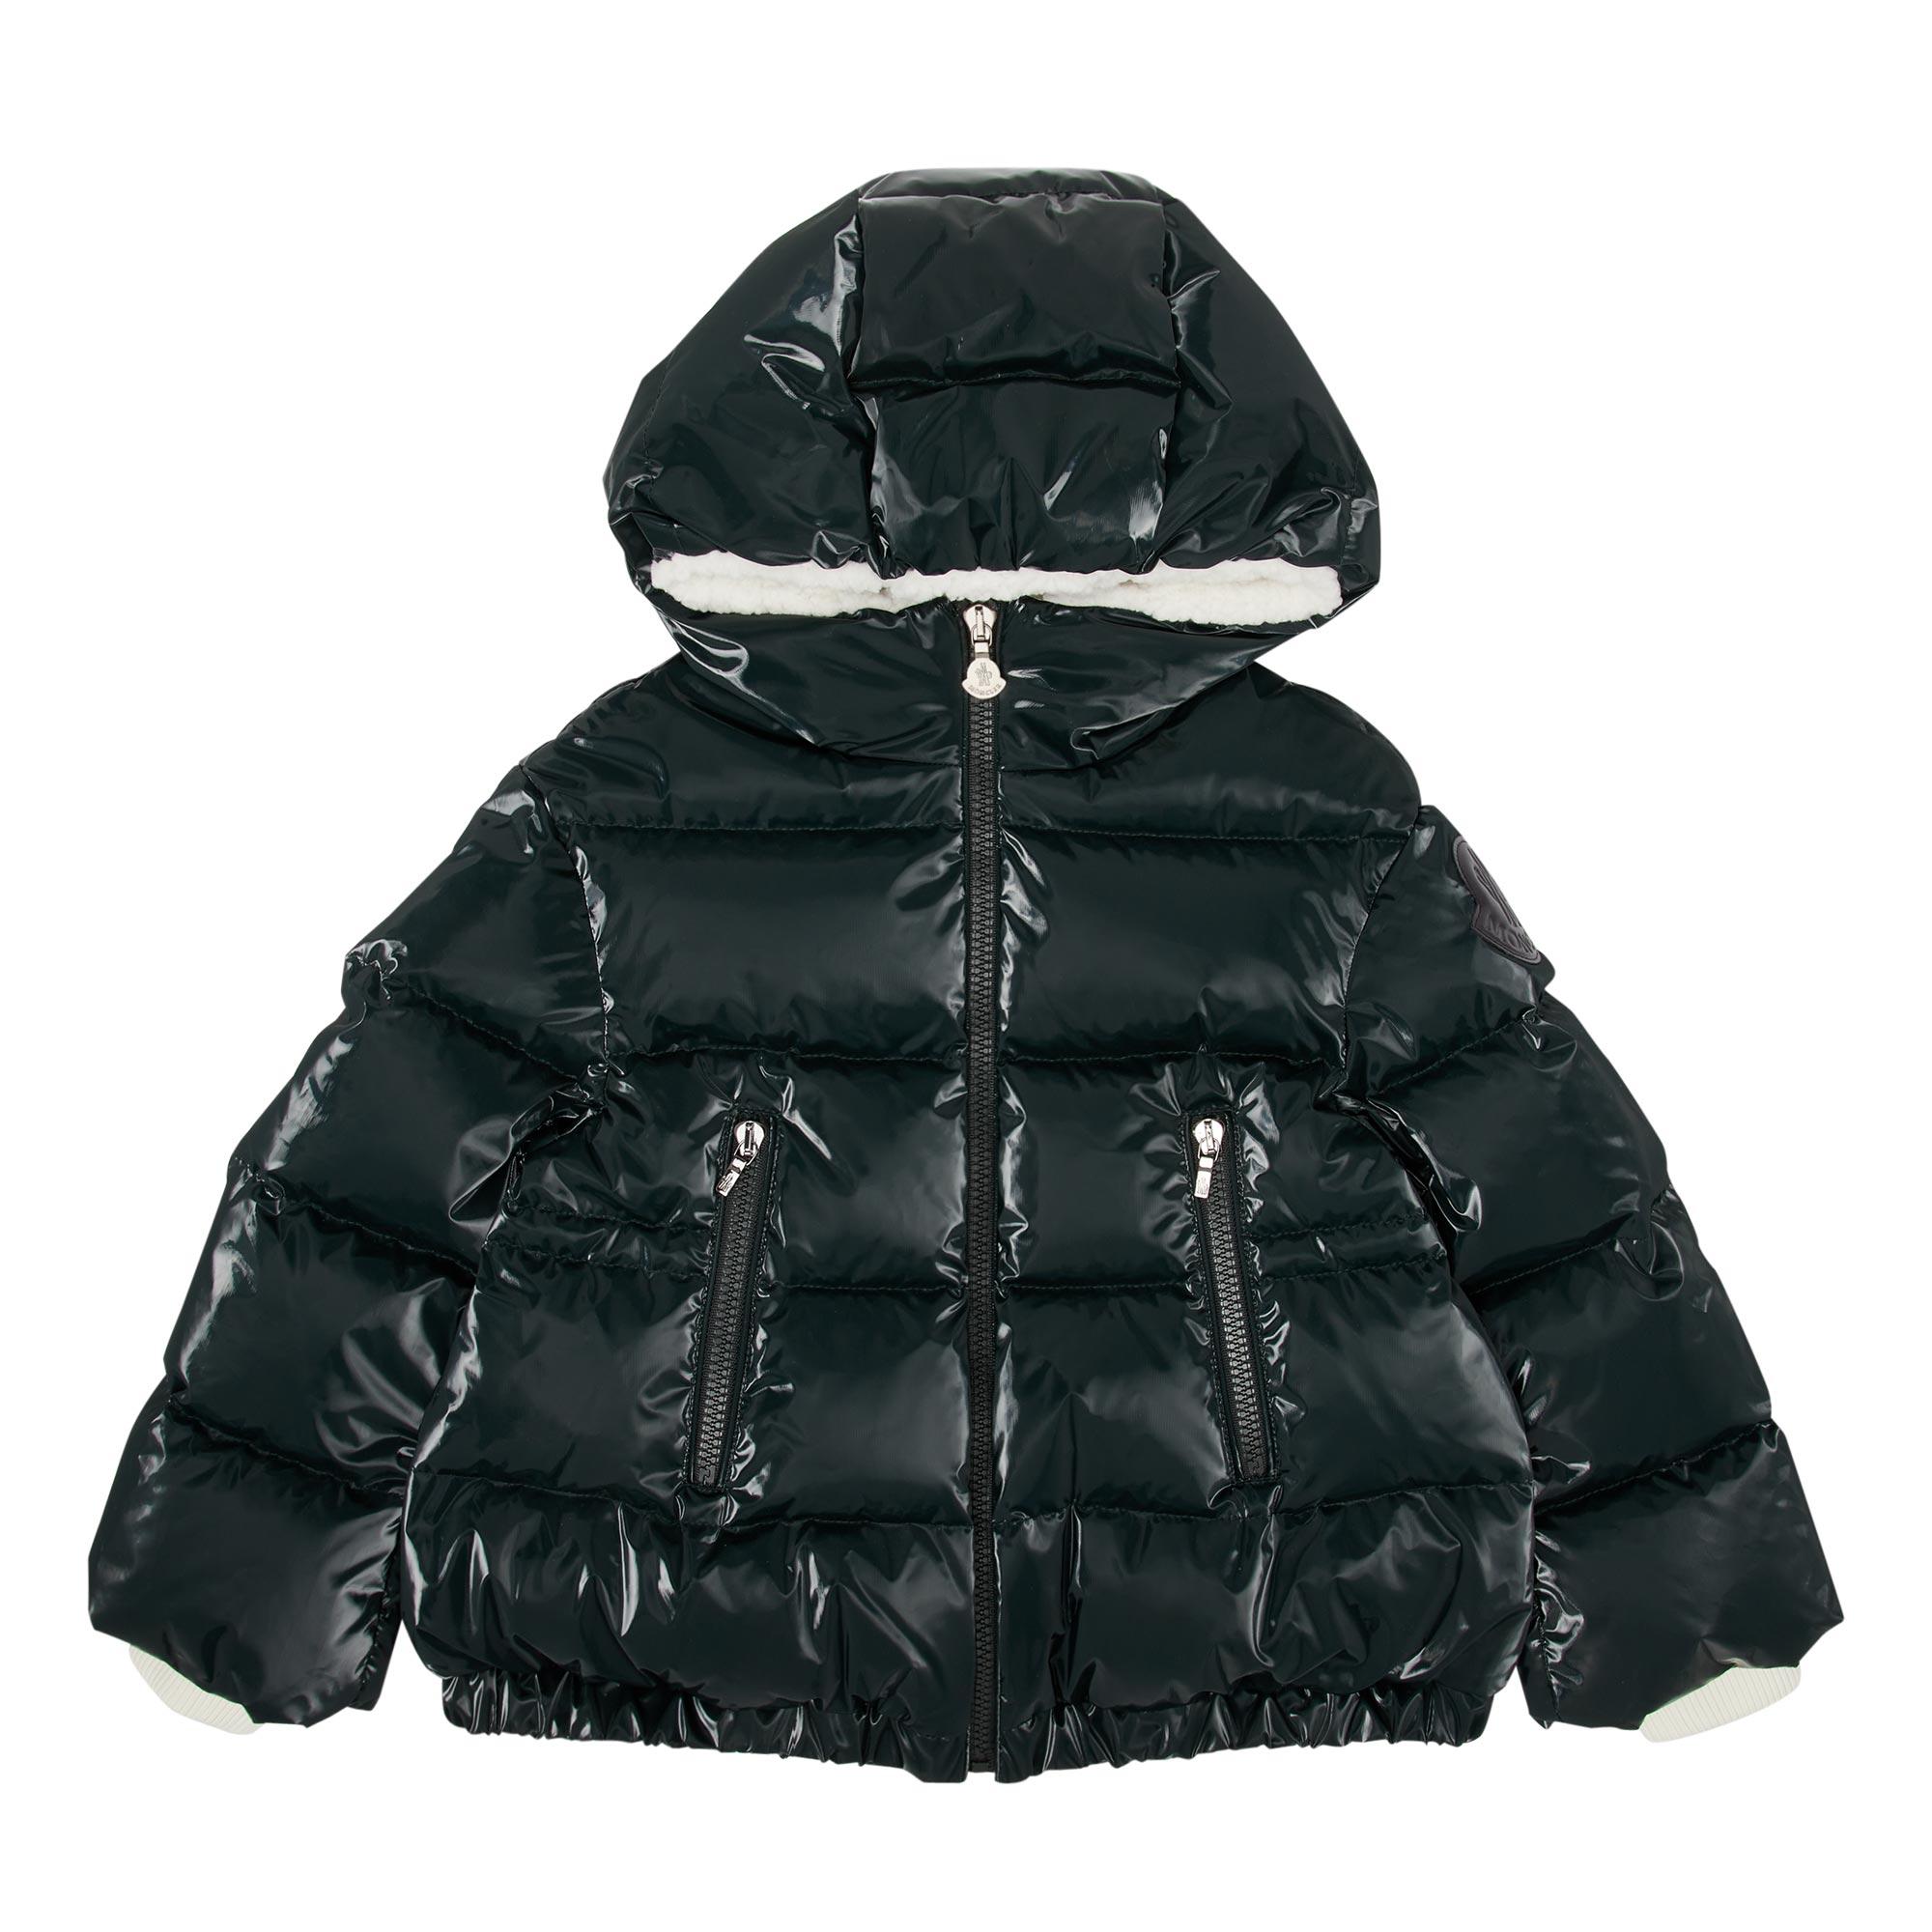 Clentra Glossy Puffer Coat